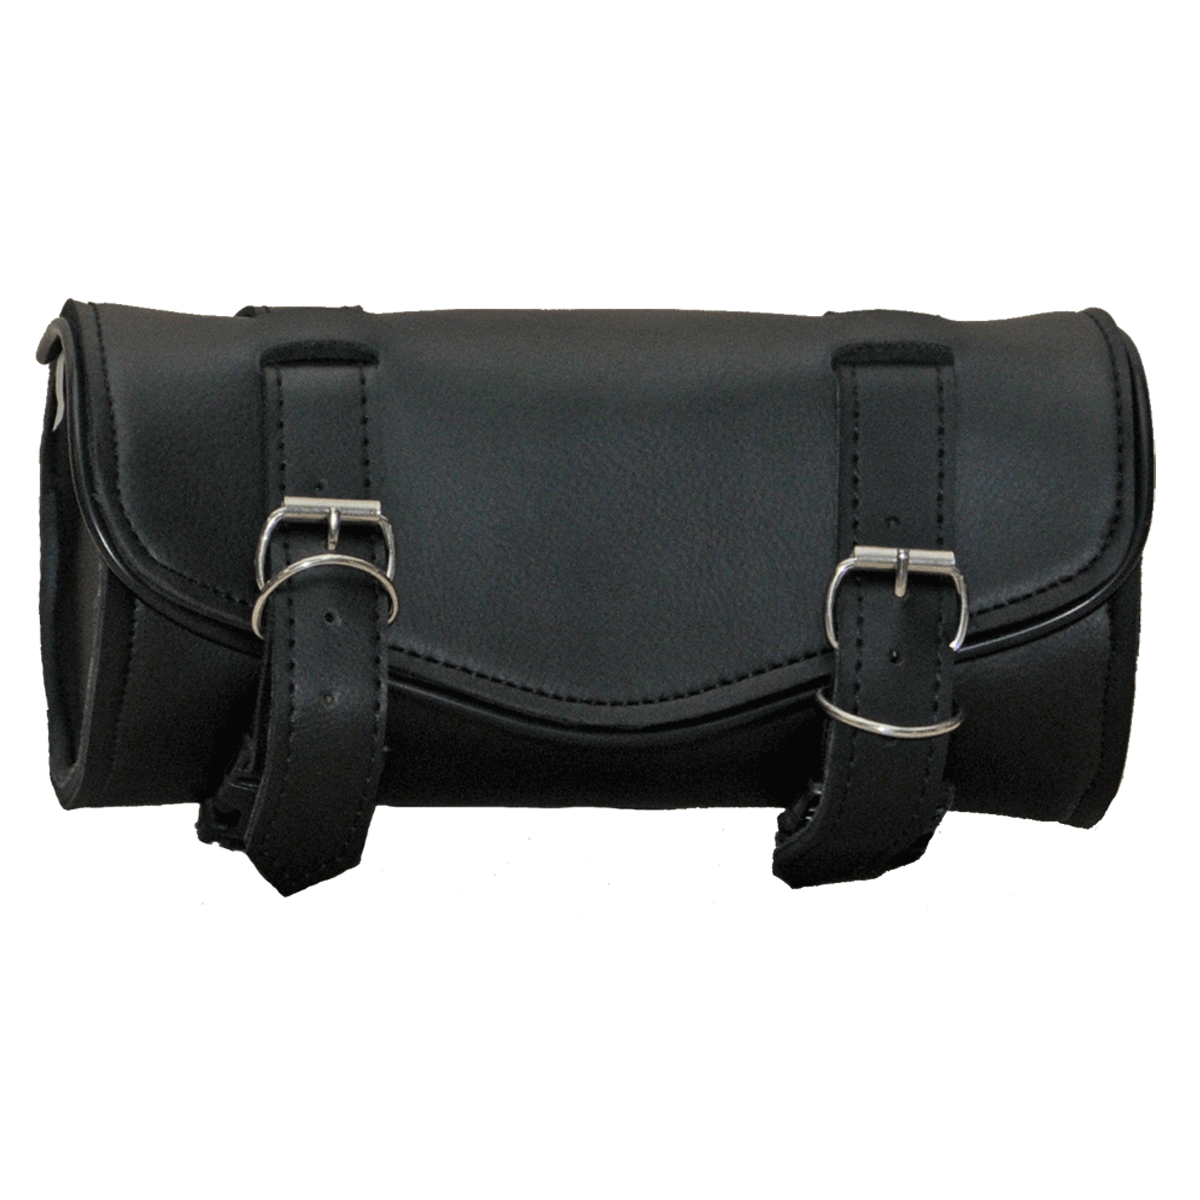 VS102H Vance Leather Hard Shell 2 Strap Plain Tool Bag with Quick Releases